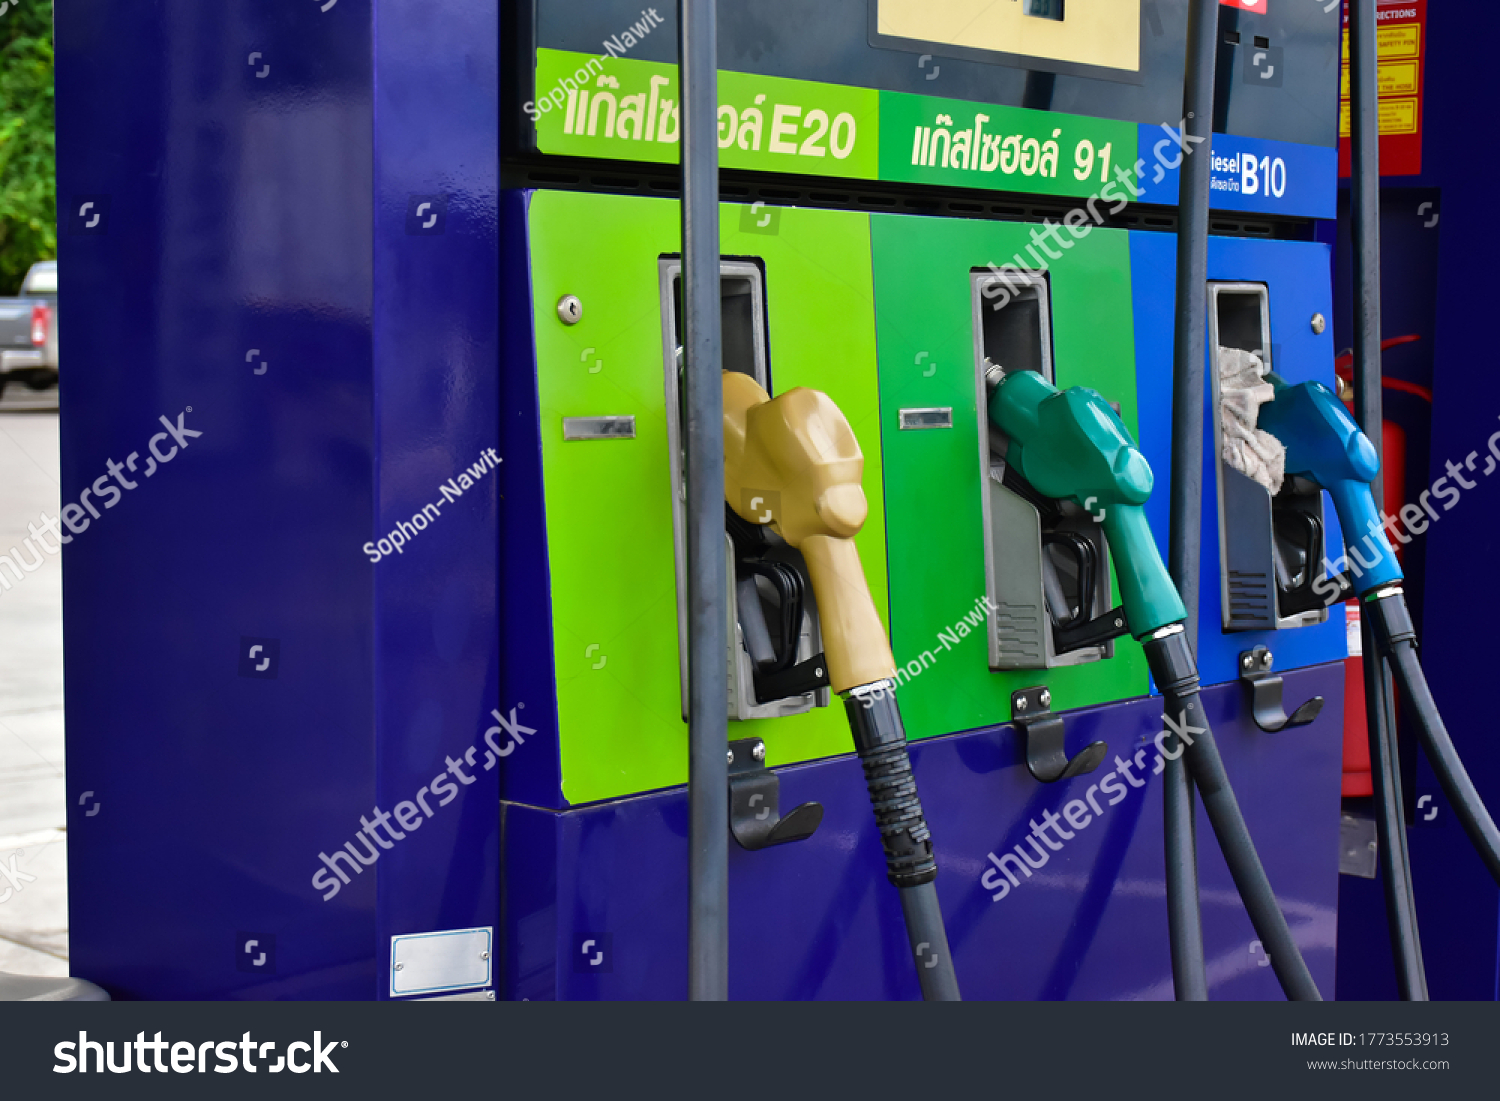 Fuel nozzles at the gas station, Thai language above green nozzle is gasohol 91, above chartreuse green nozzle is gasohol E20, and above blue nozzle is diesel B10 in English. #1773553913